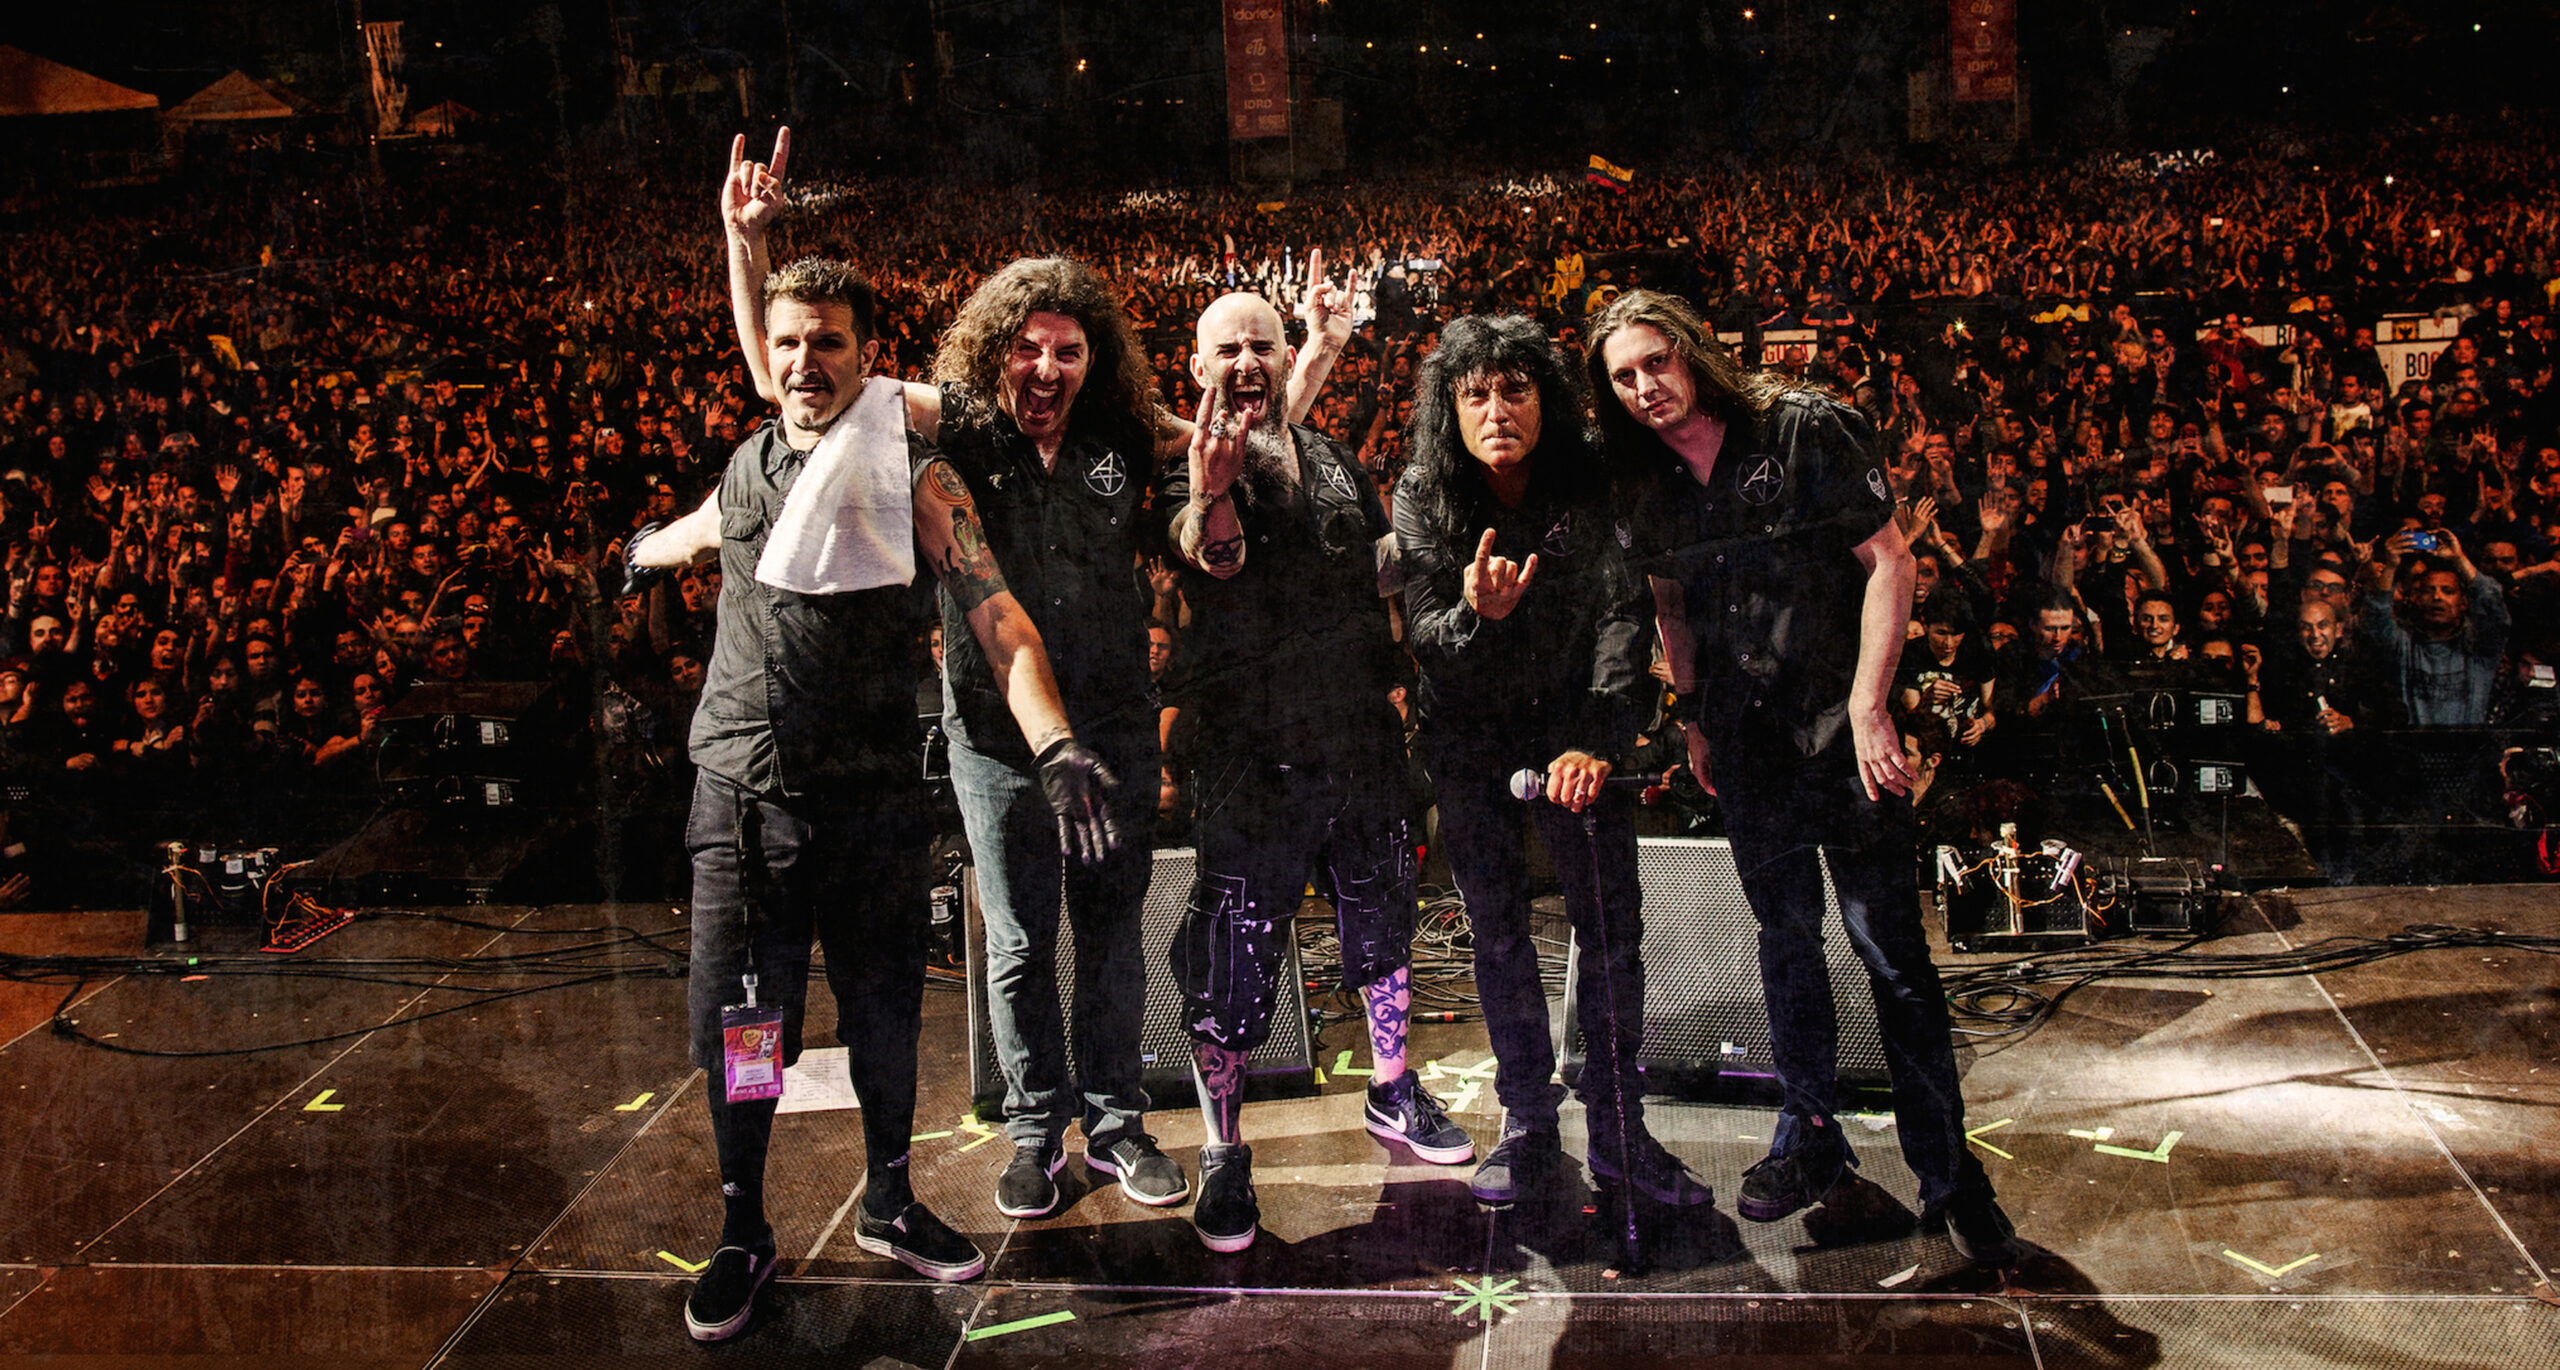 Anthrax on stage